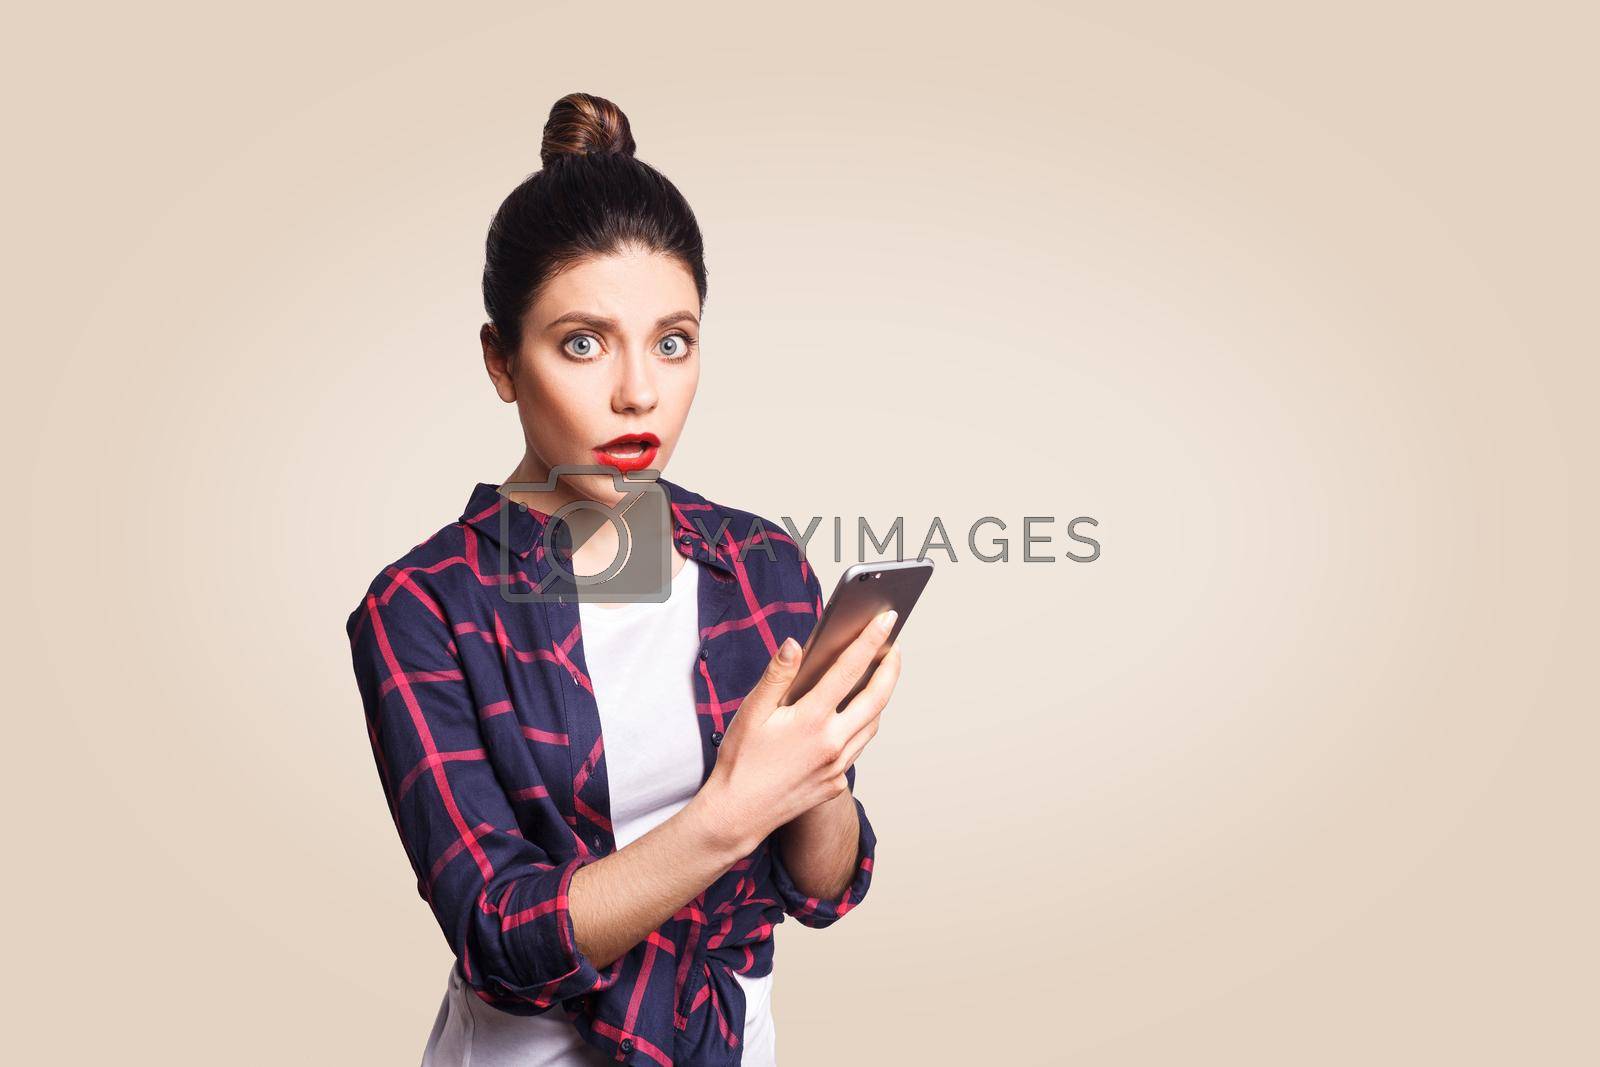 Royalty free image of emotional brunette girl in casual style by Khosro1